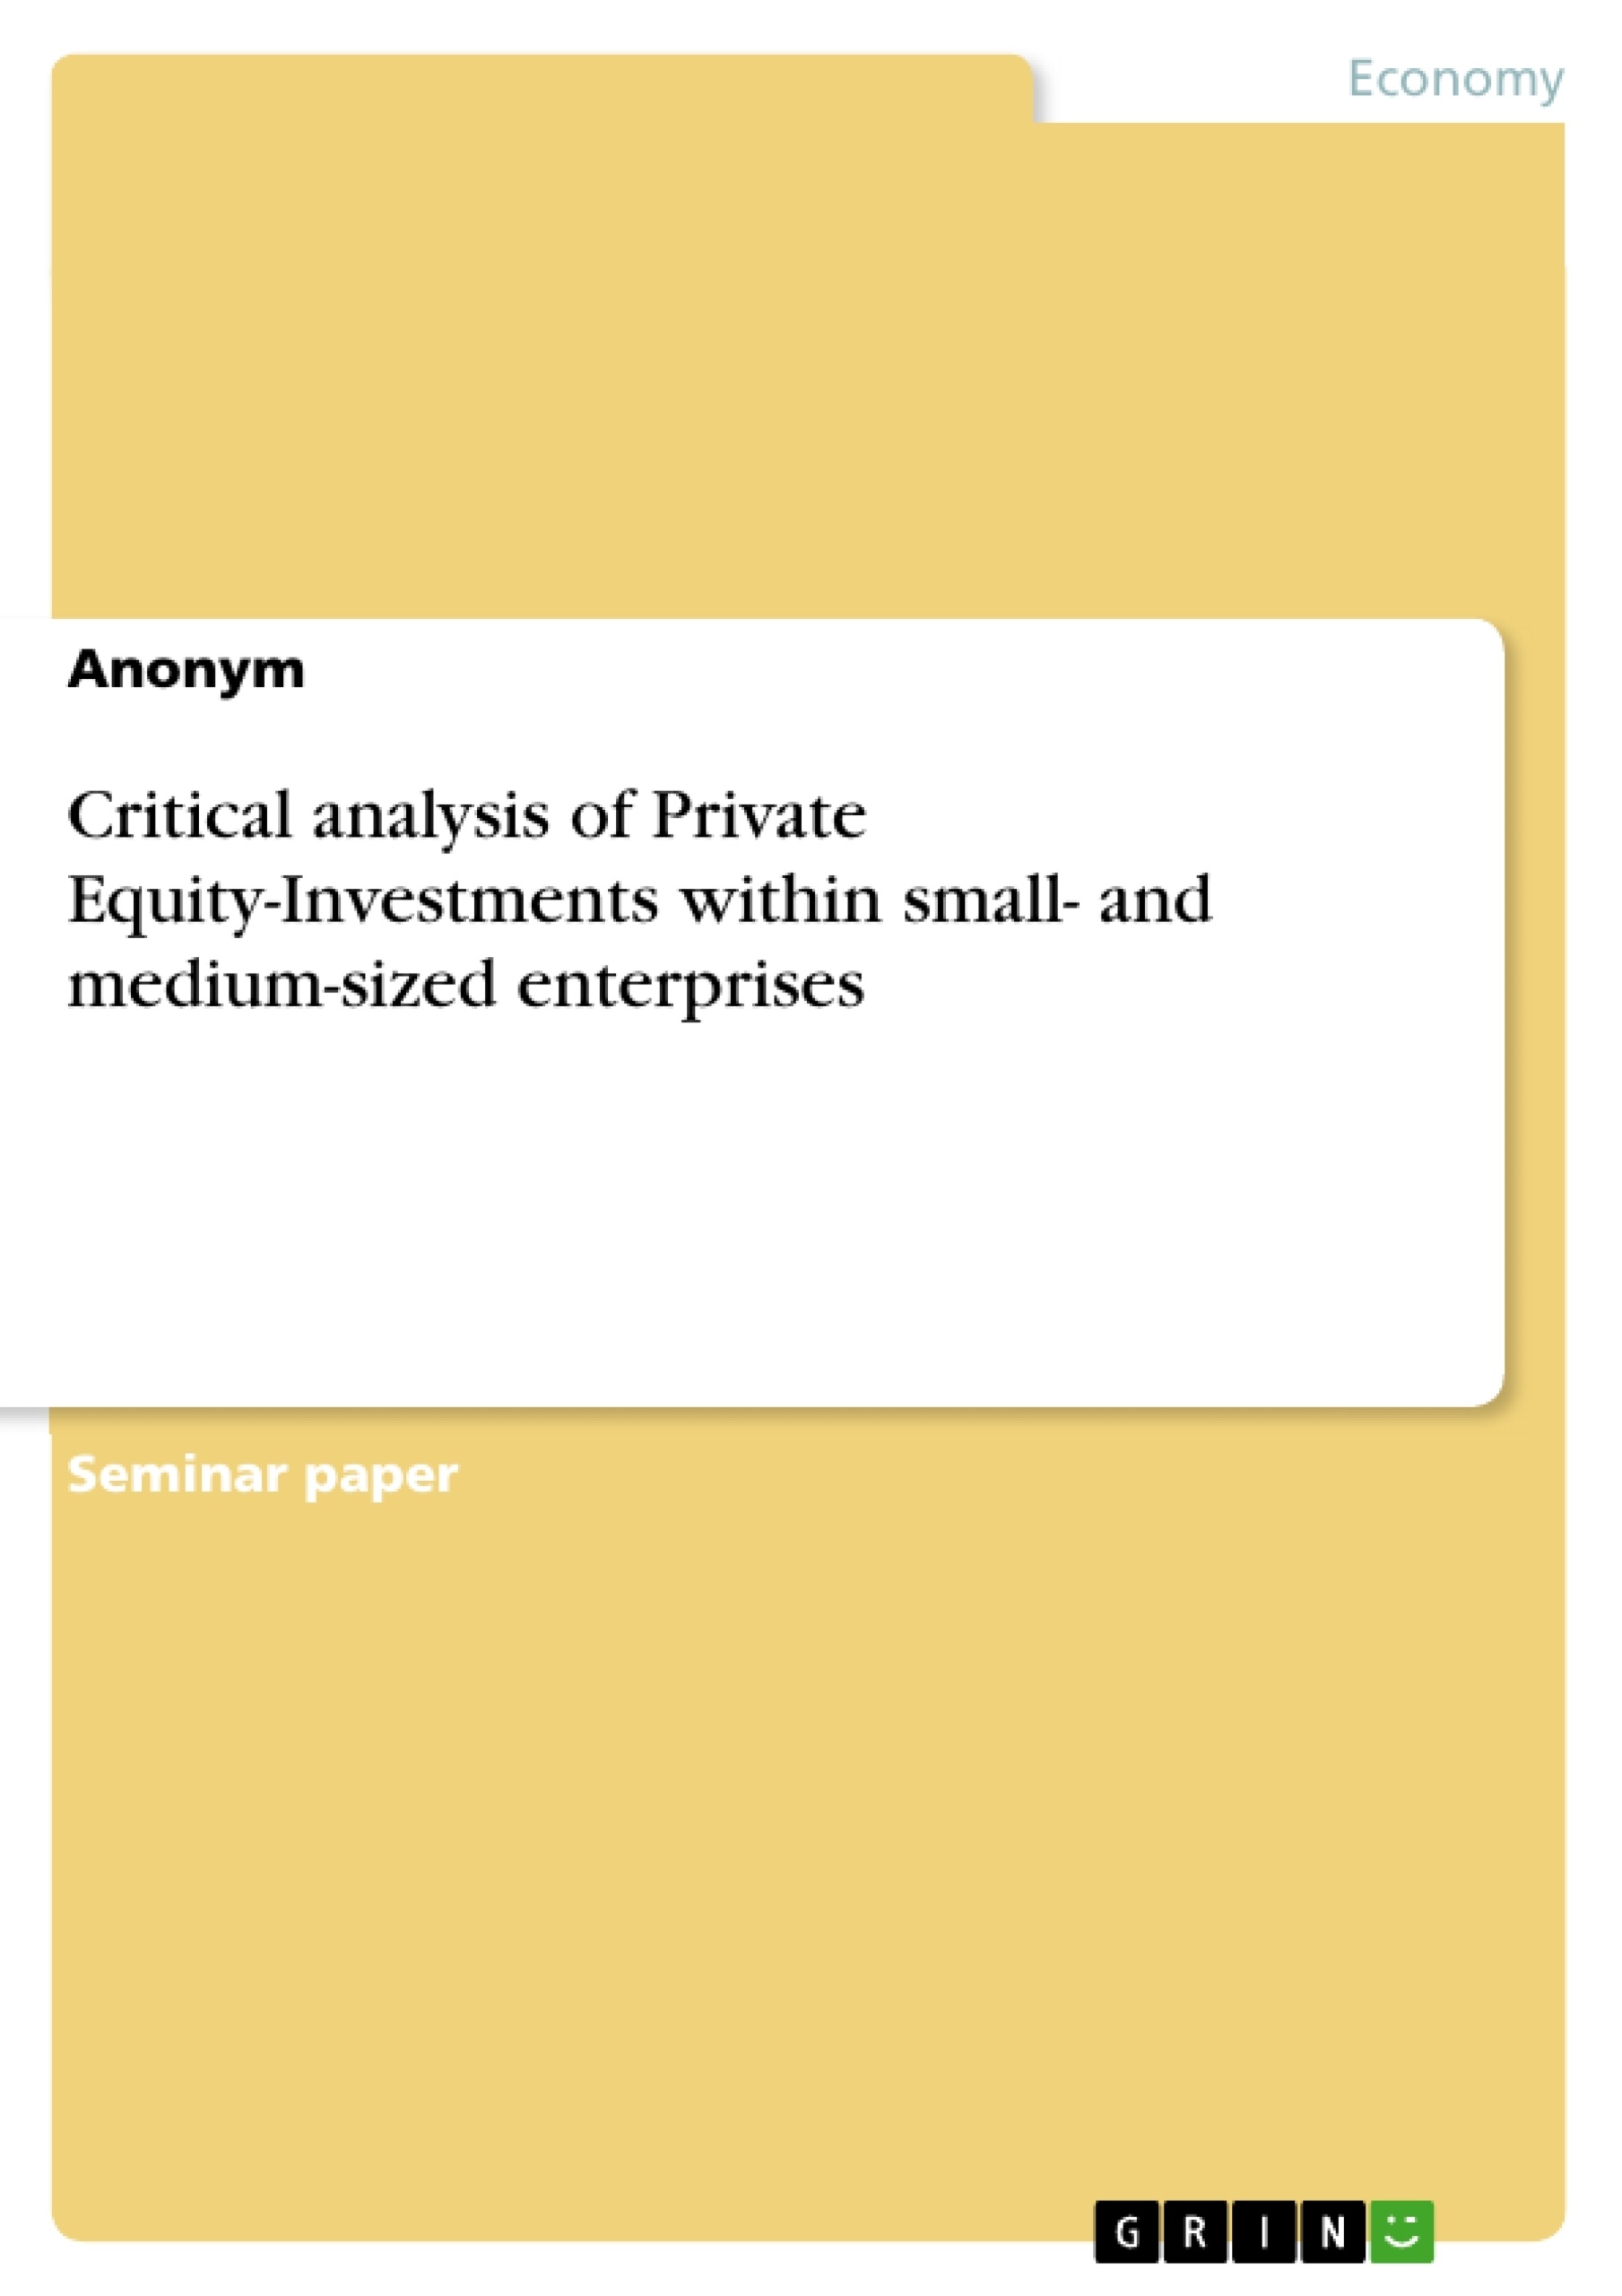 Title: Critical analysis of Private Equity-Investments within small- and medium-sized enterprises